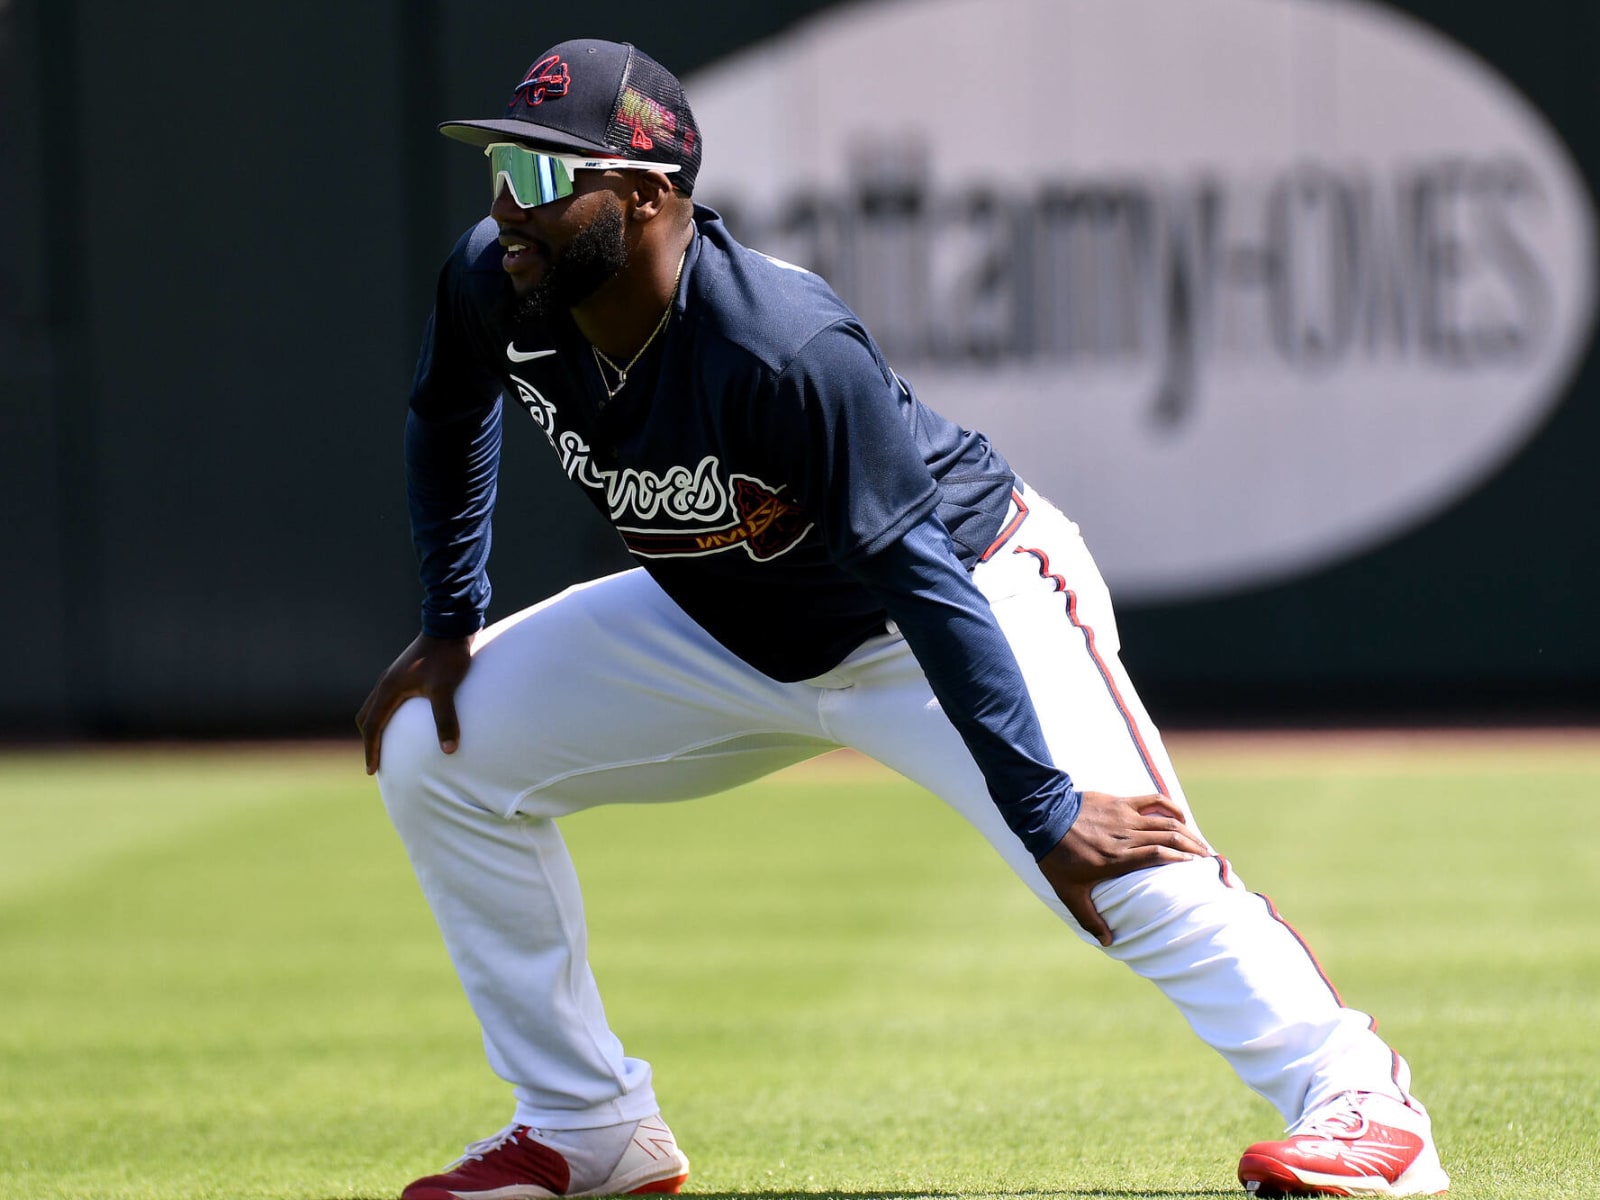 Braves promote Michael Harris II, club's top outfield prospect